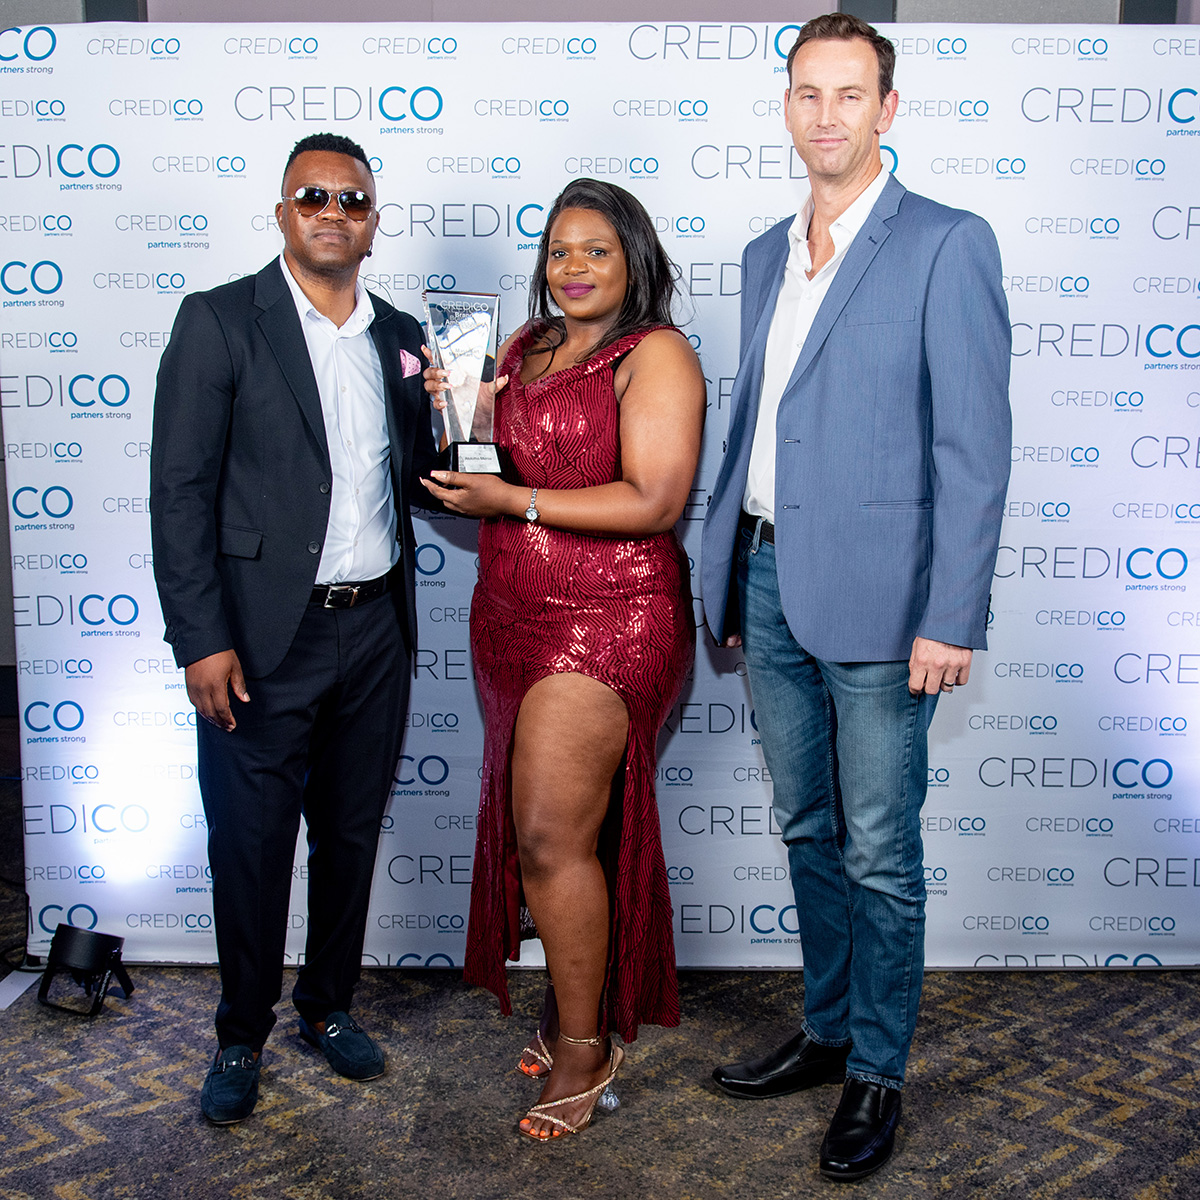 A winner poses with her award and two companions in front of a branded background at Credico South Africa's 2023 Awards Gala at Sun City Resort.